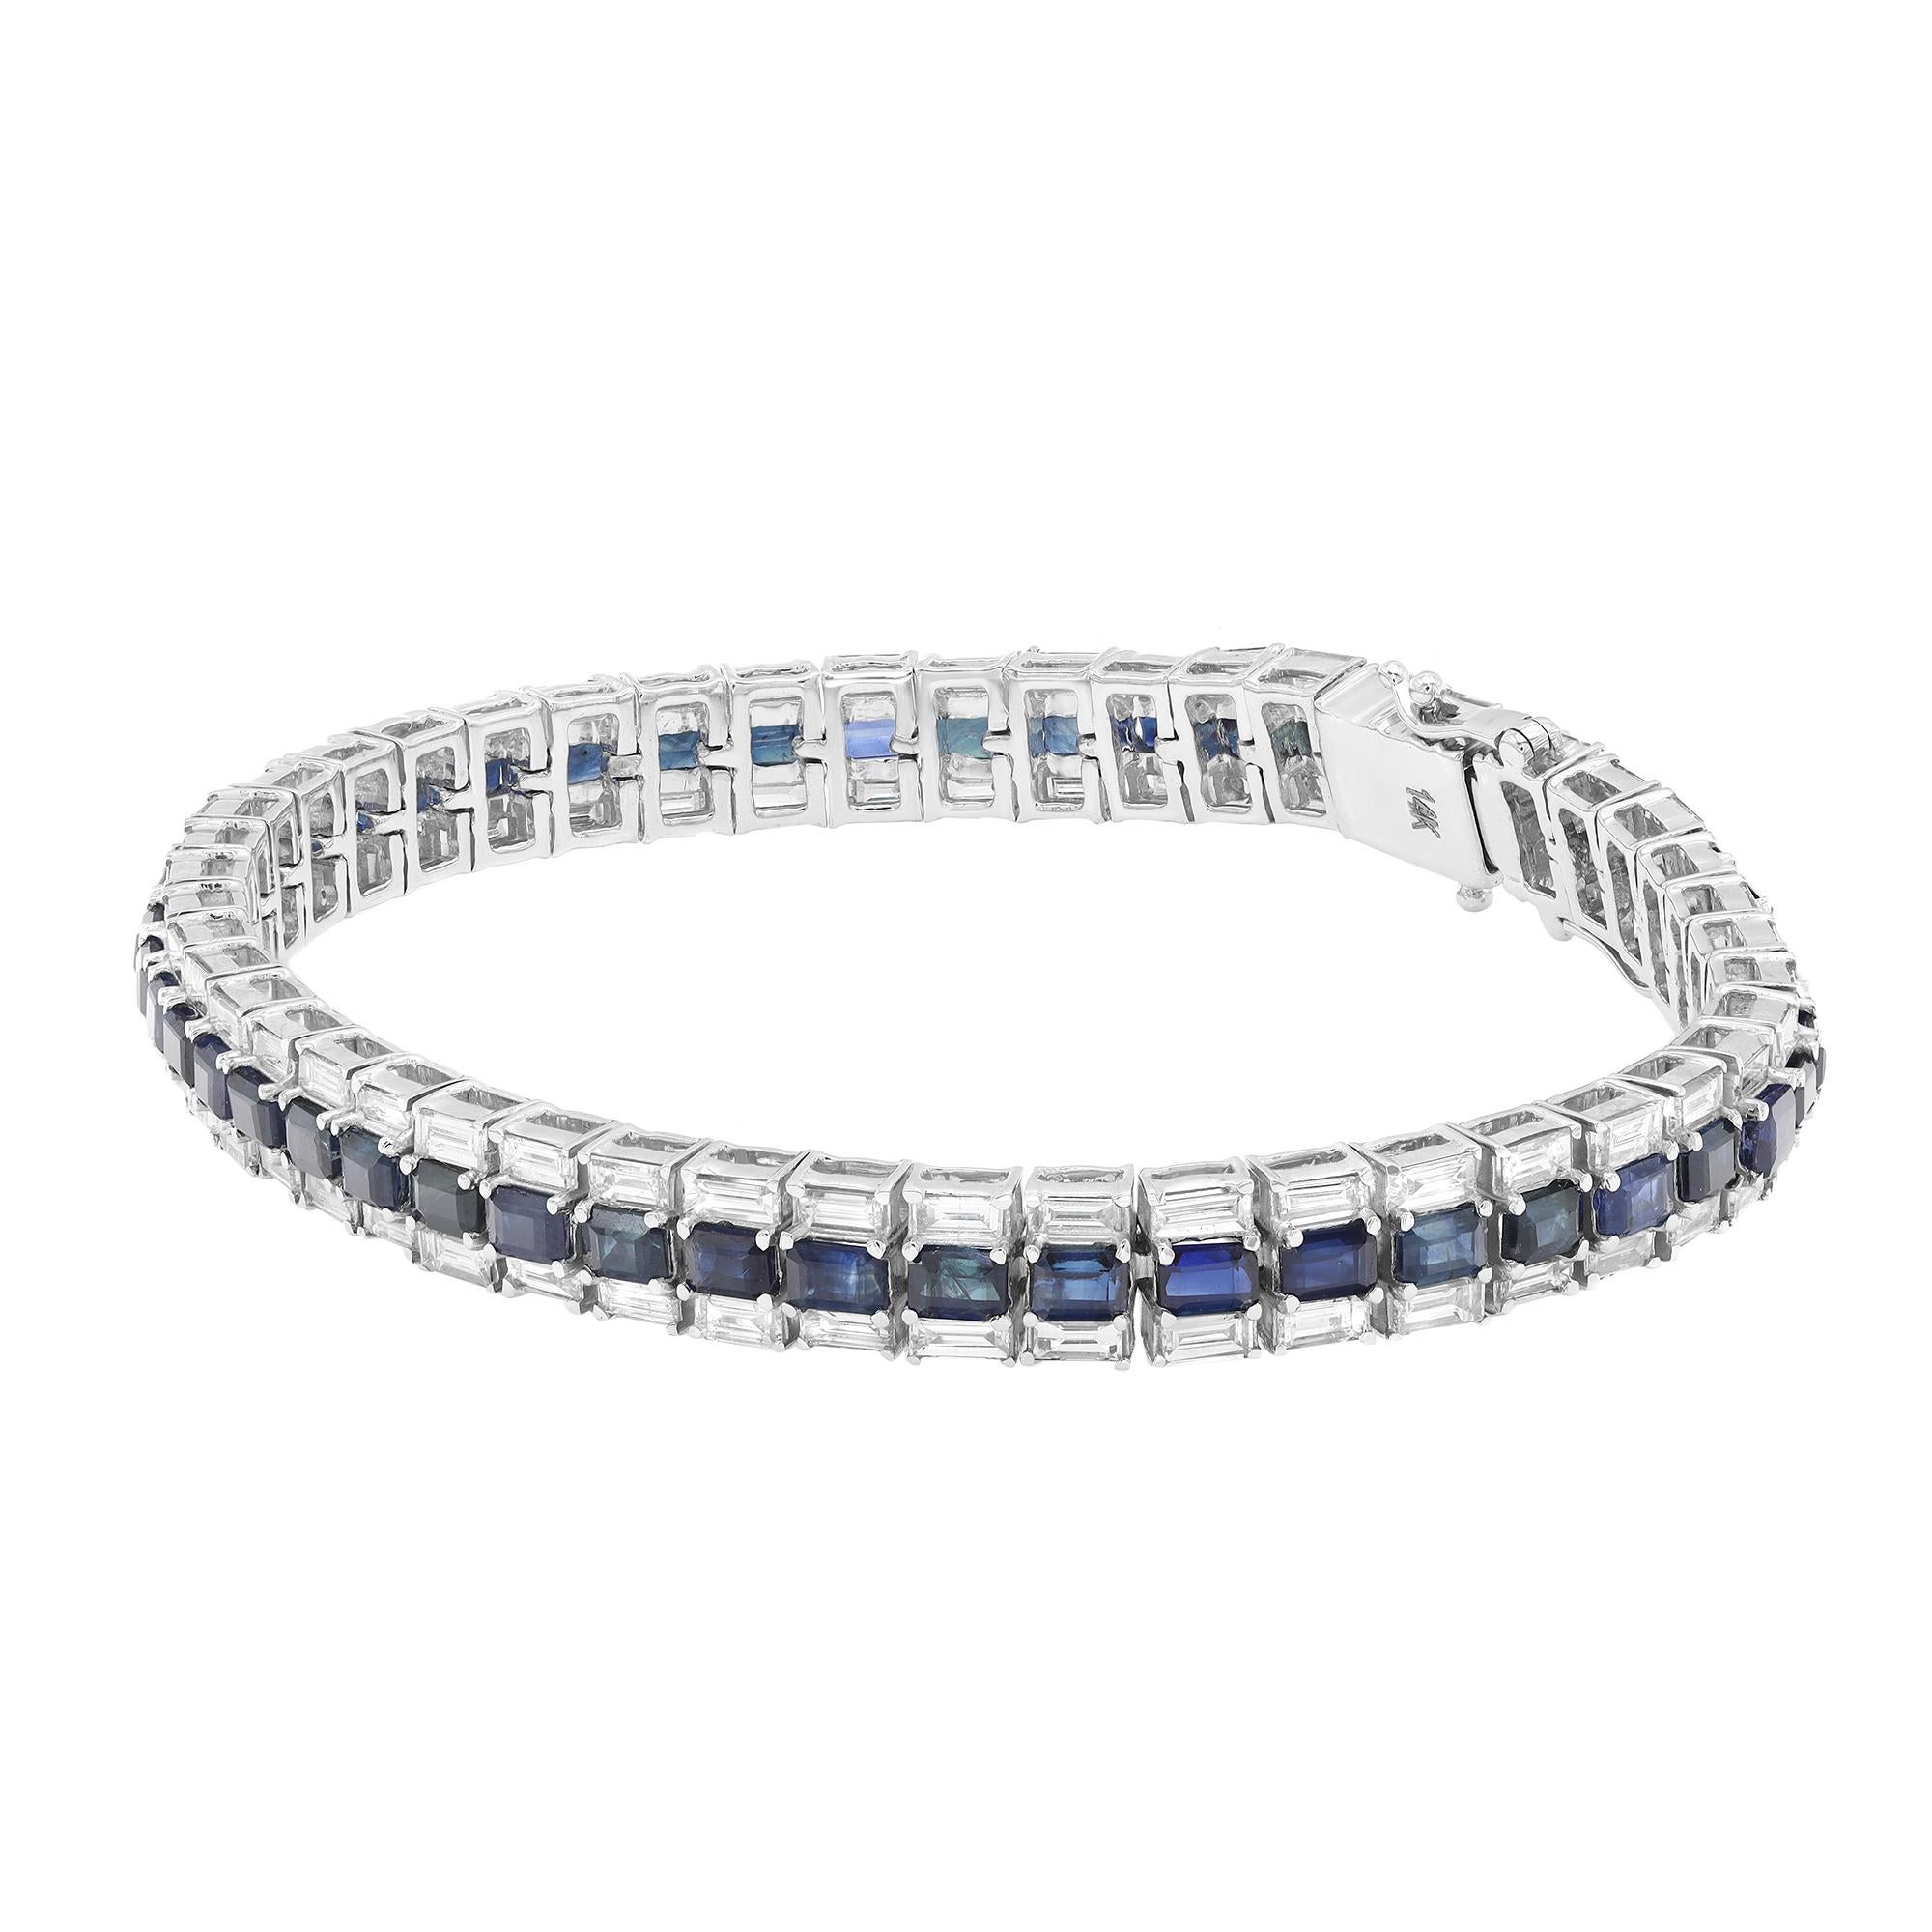 This beautifully crafted tennis bracelet features a center line of baguette cut blue sapphires accented by baguette cut diamonds along the borders of the bracelet in four prong setting. Crafted in 14K white gold. Total diamond weight: 4.37 carats.